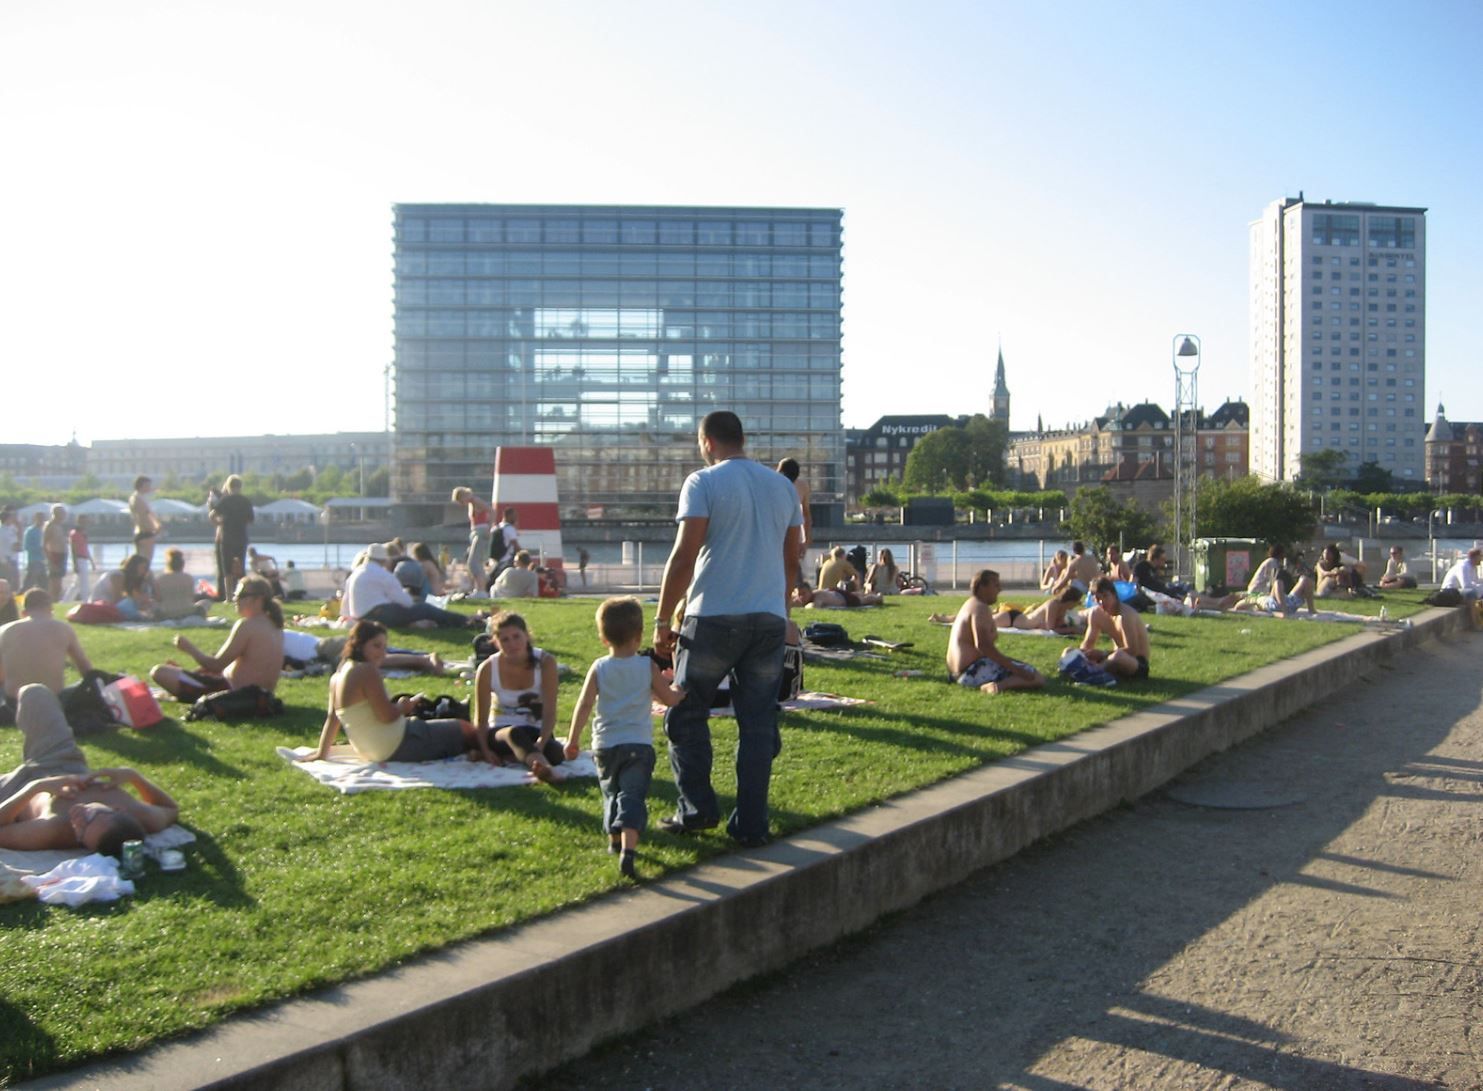 Local Round-Up: Seven-day ban to prohibit gatherings at Islands Brygge